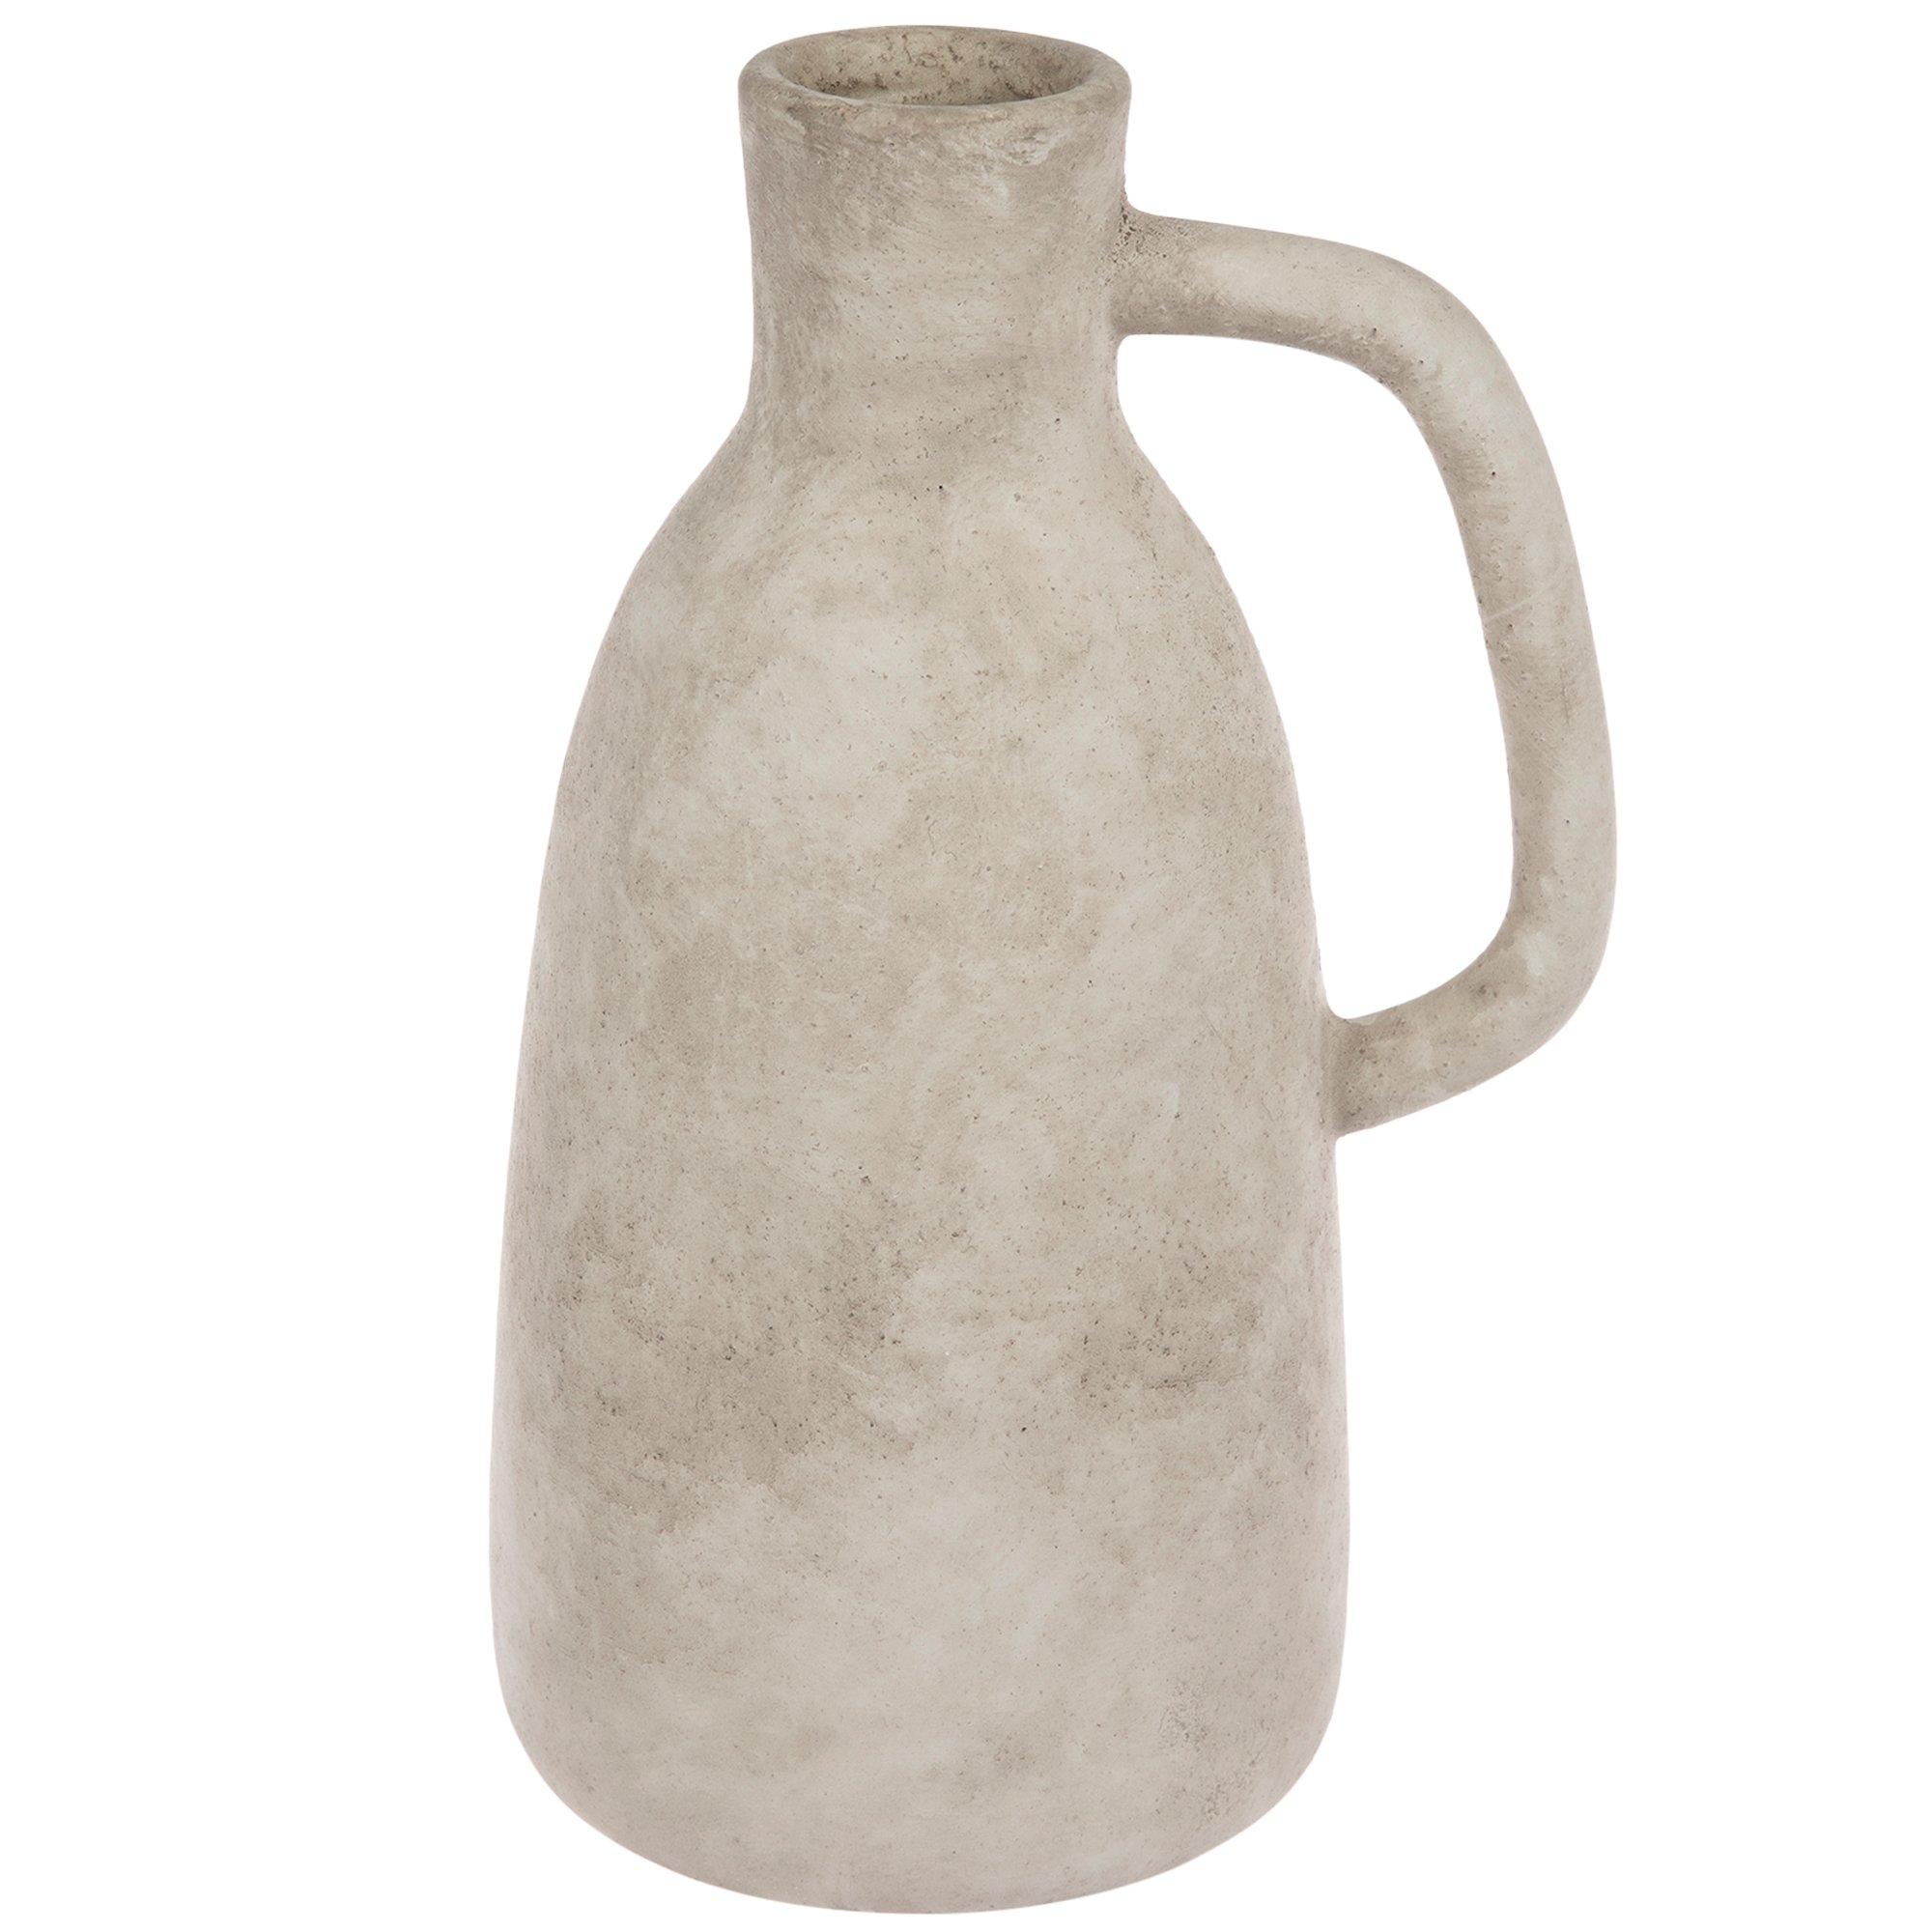 White Rustic Metal Pitcher, Hobby Lobby